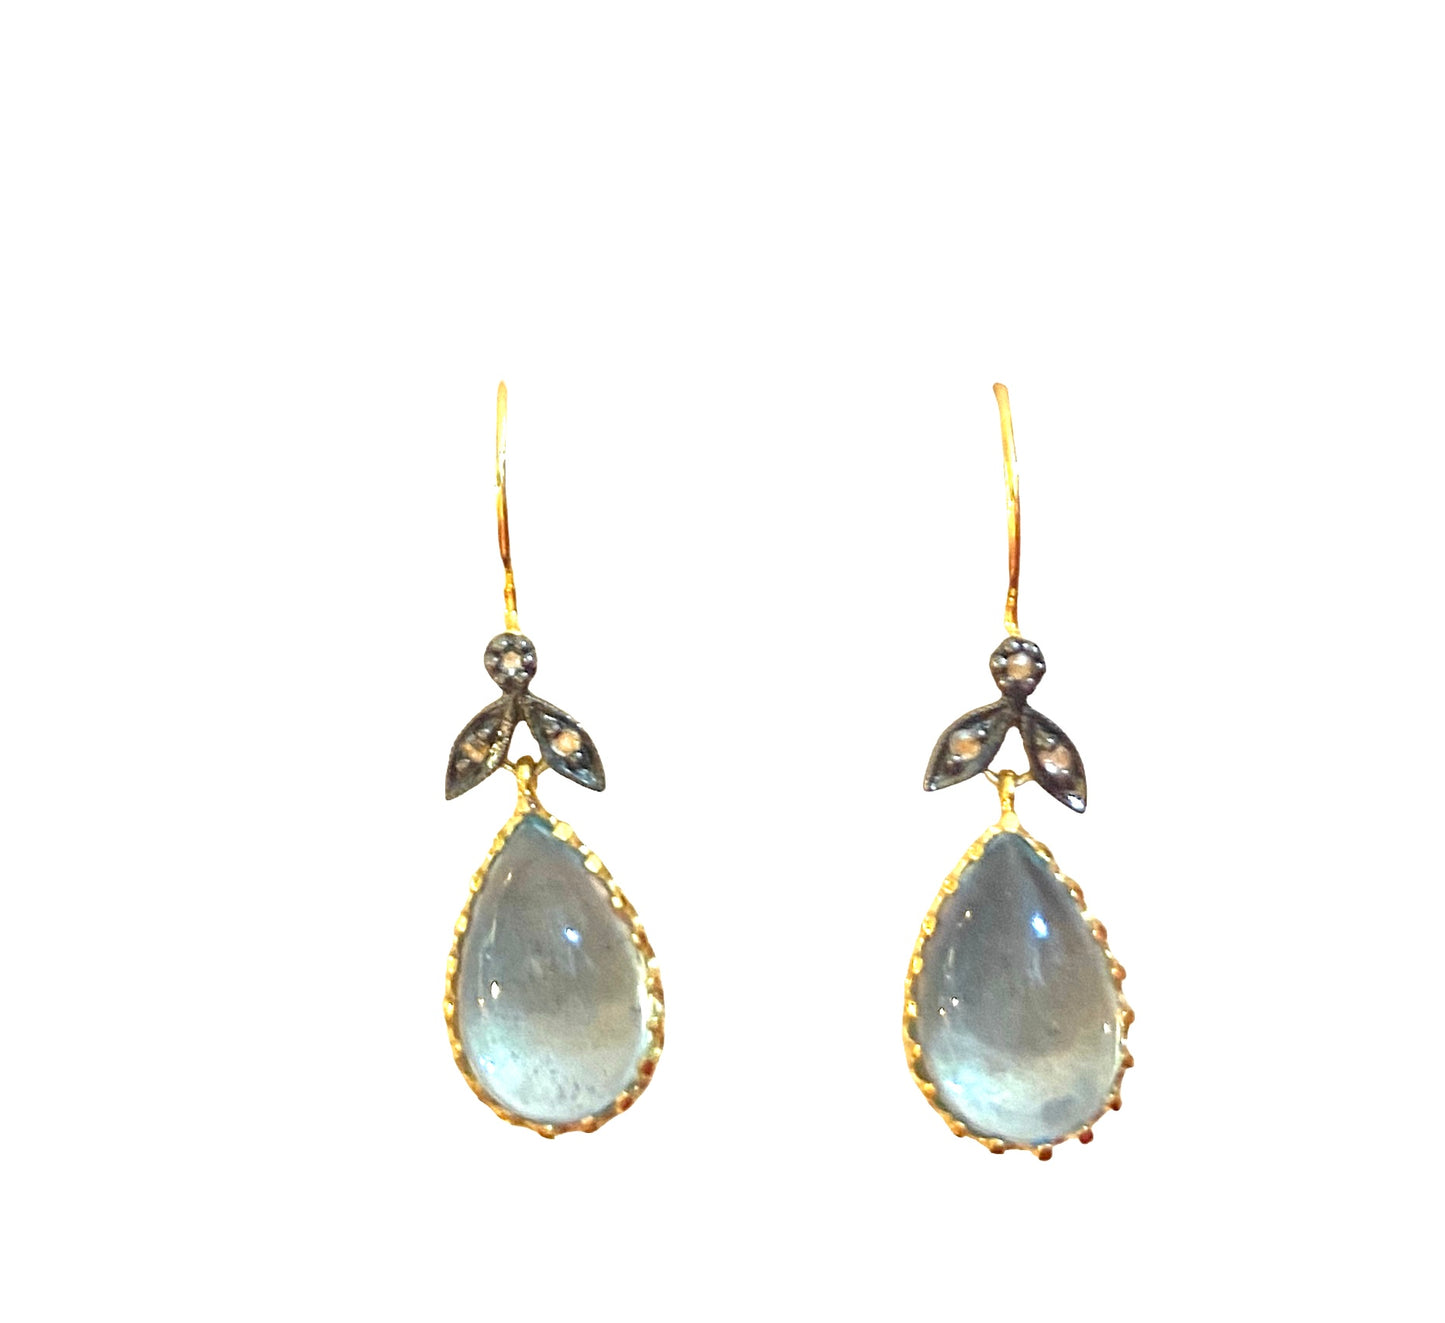 9ct gold drop earrings with topaz and diamonds